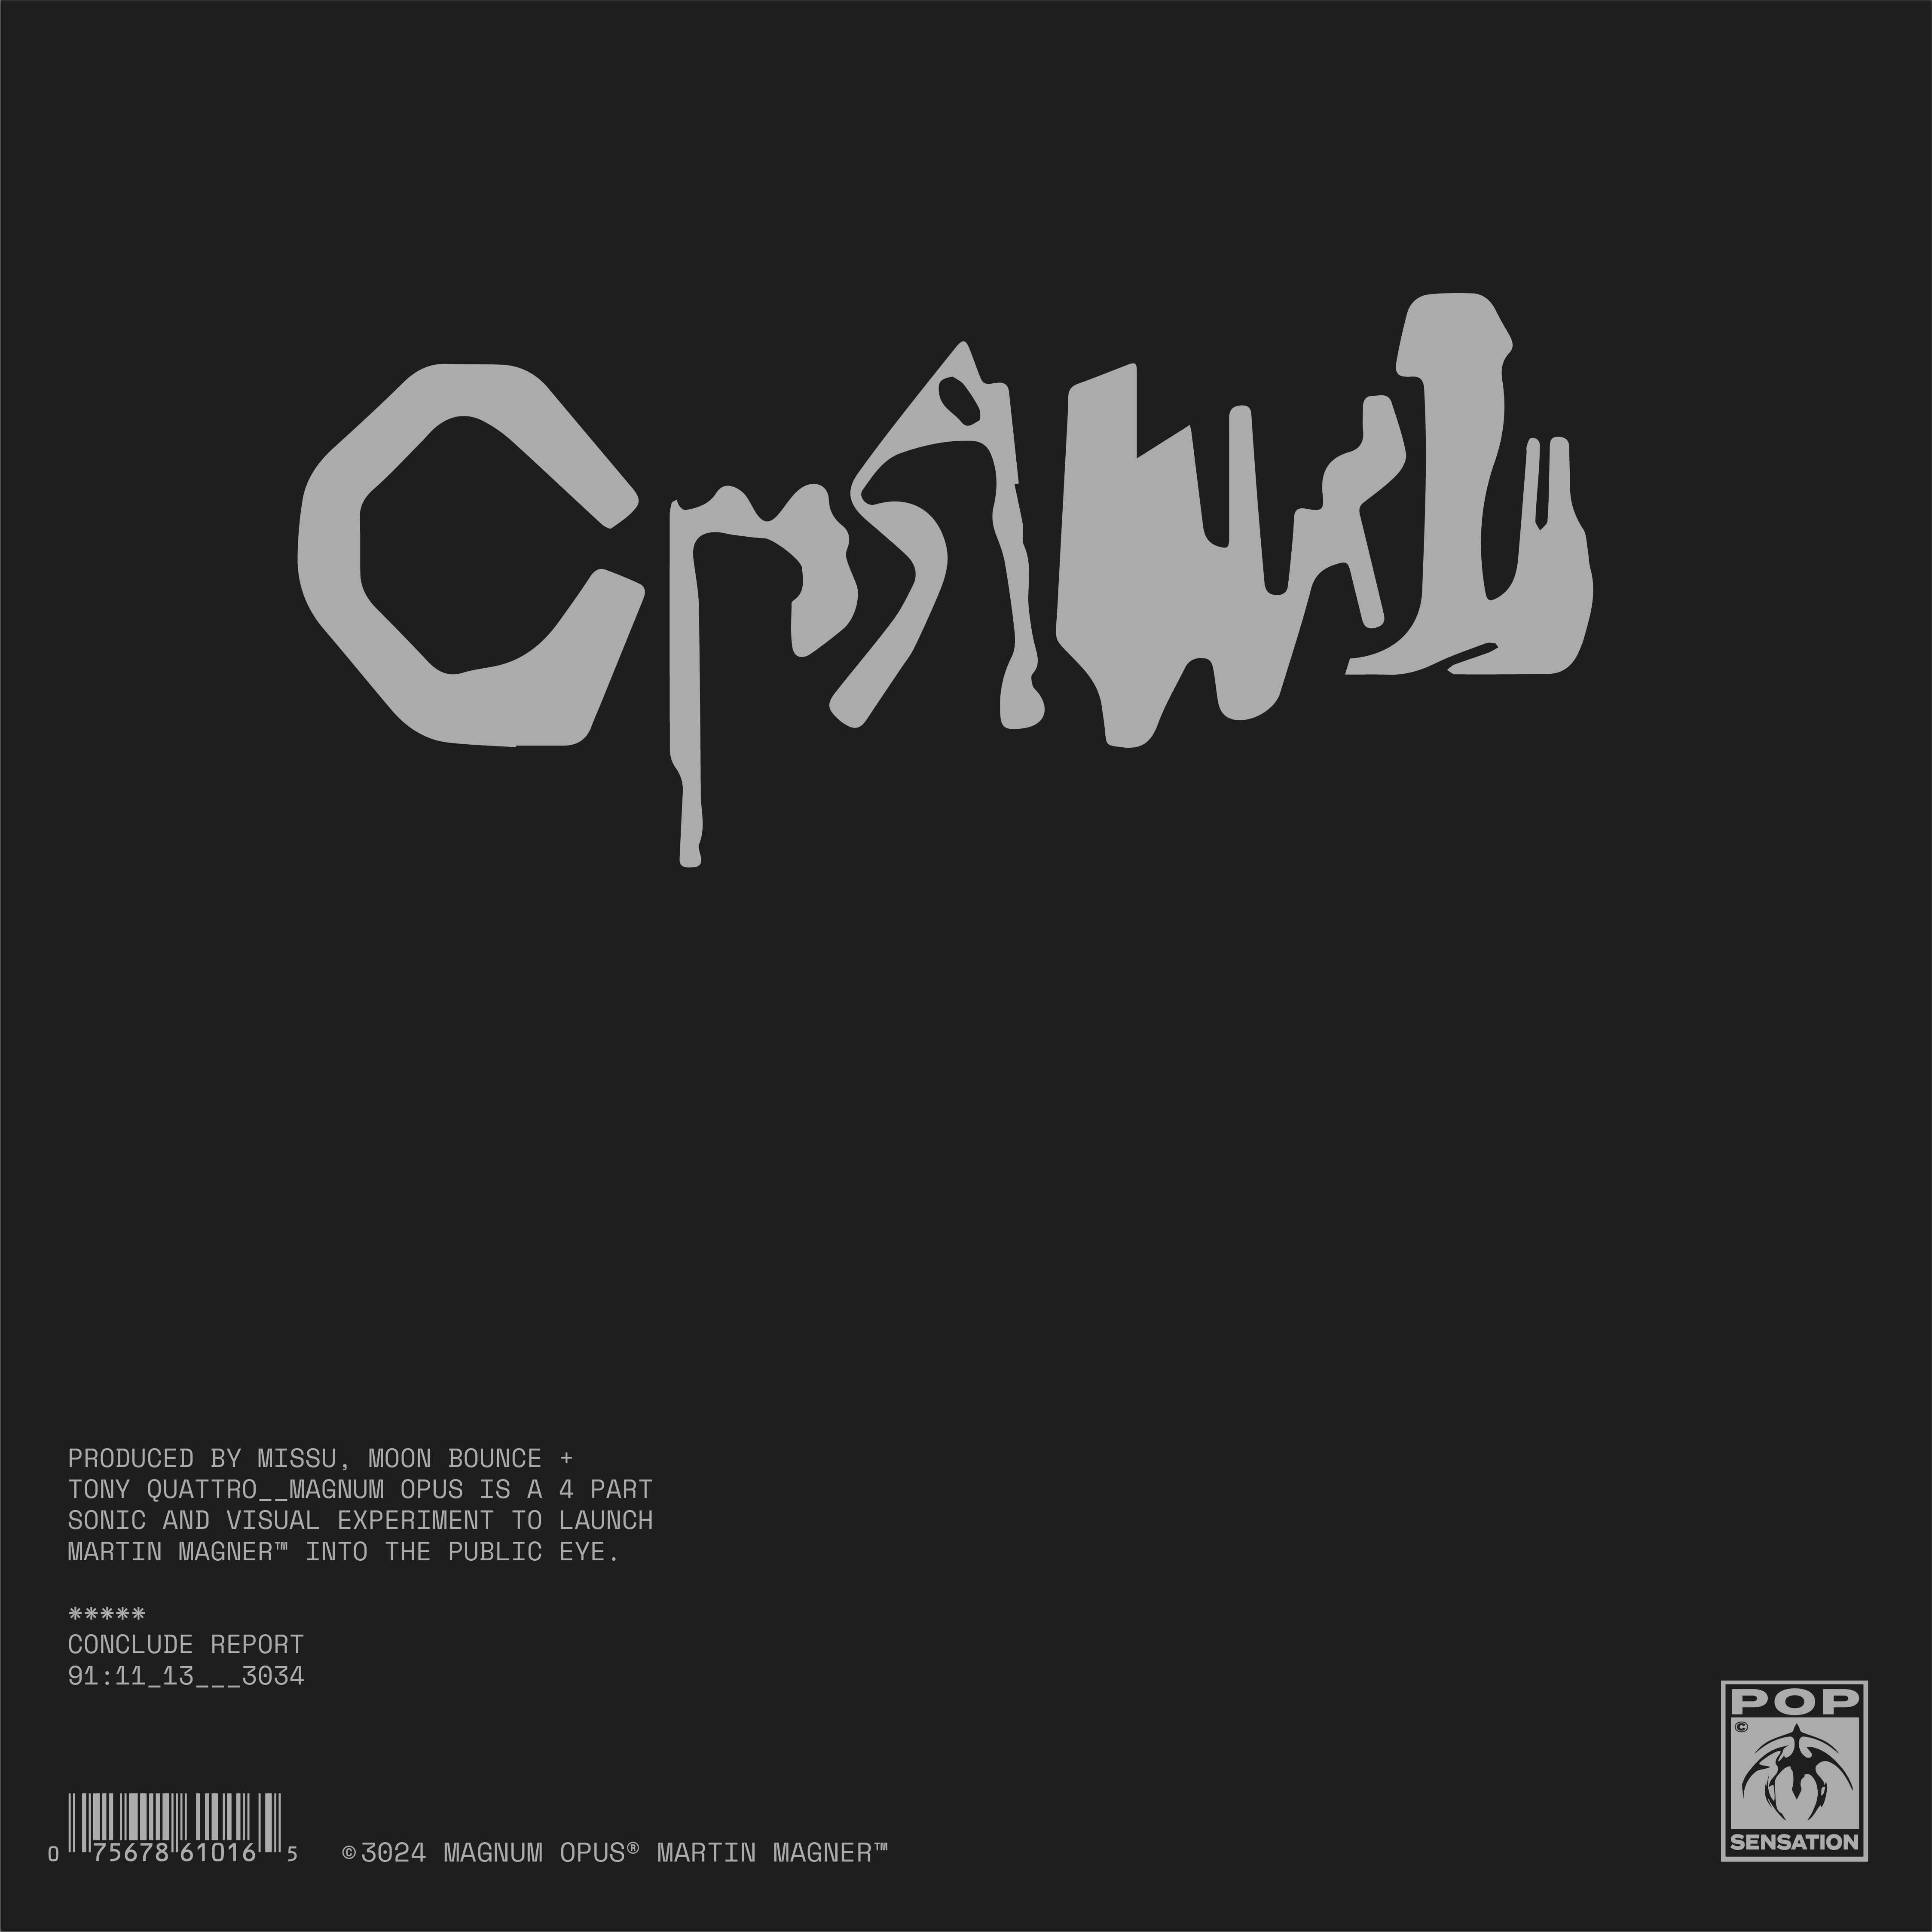 Project art for crawl